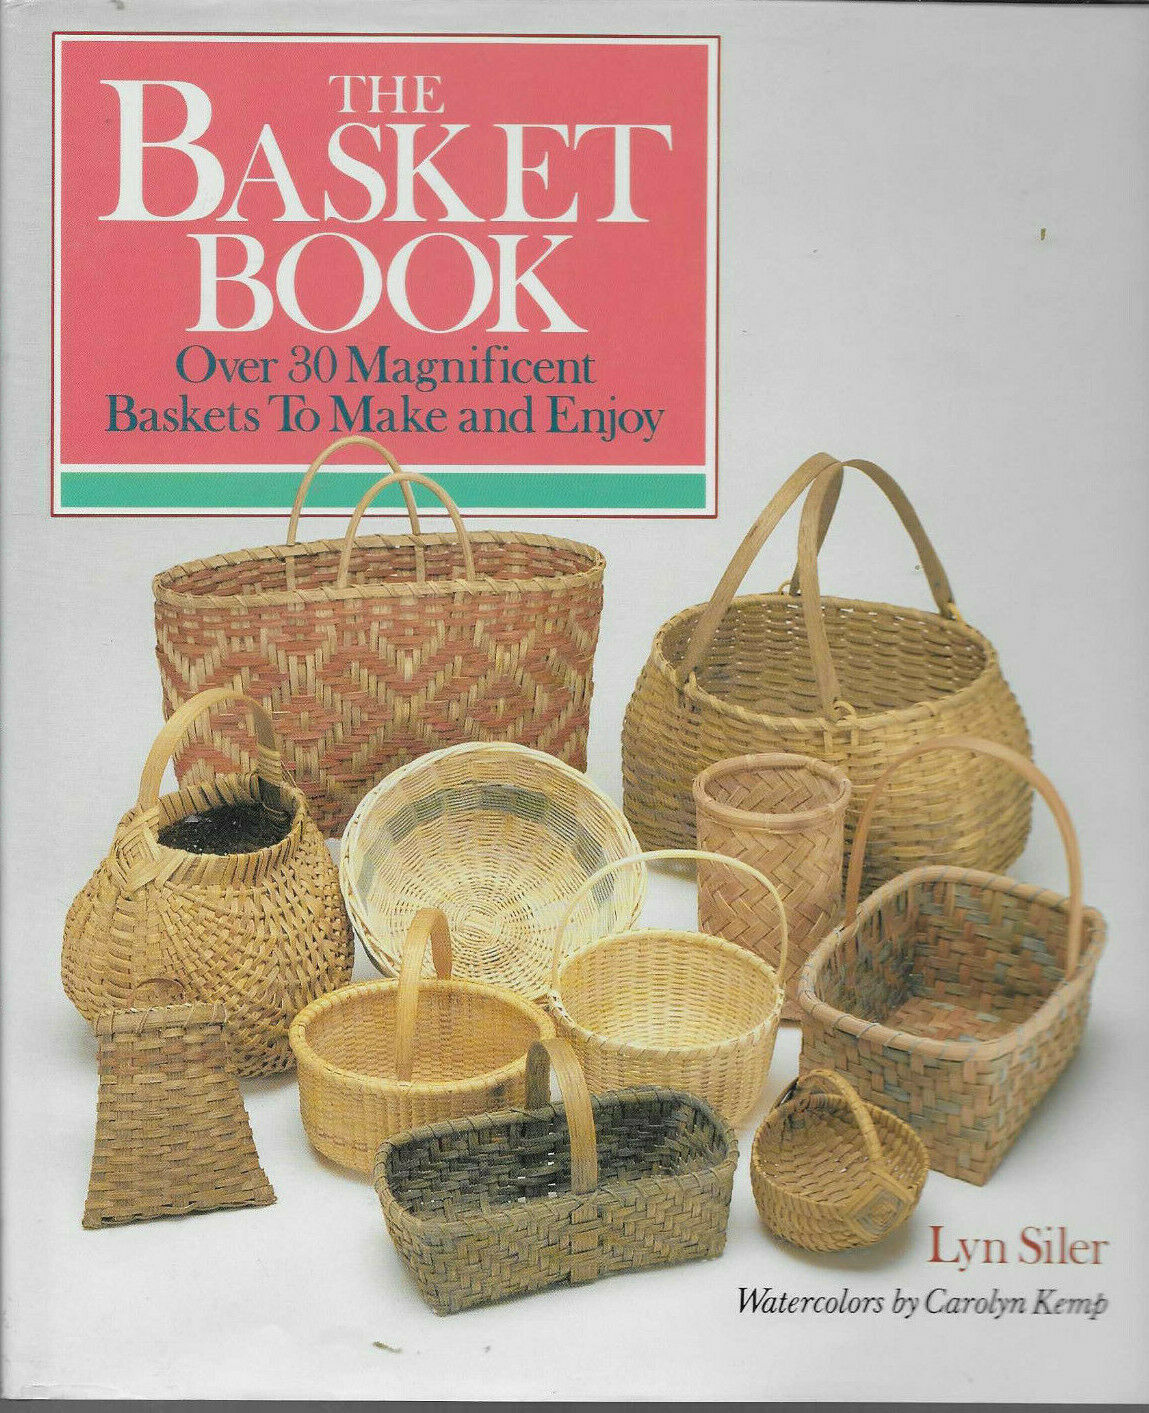 Lyn Siler's "the Basket Book"  - Over 30 Magnificent Basket Making Projects (3)